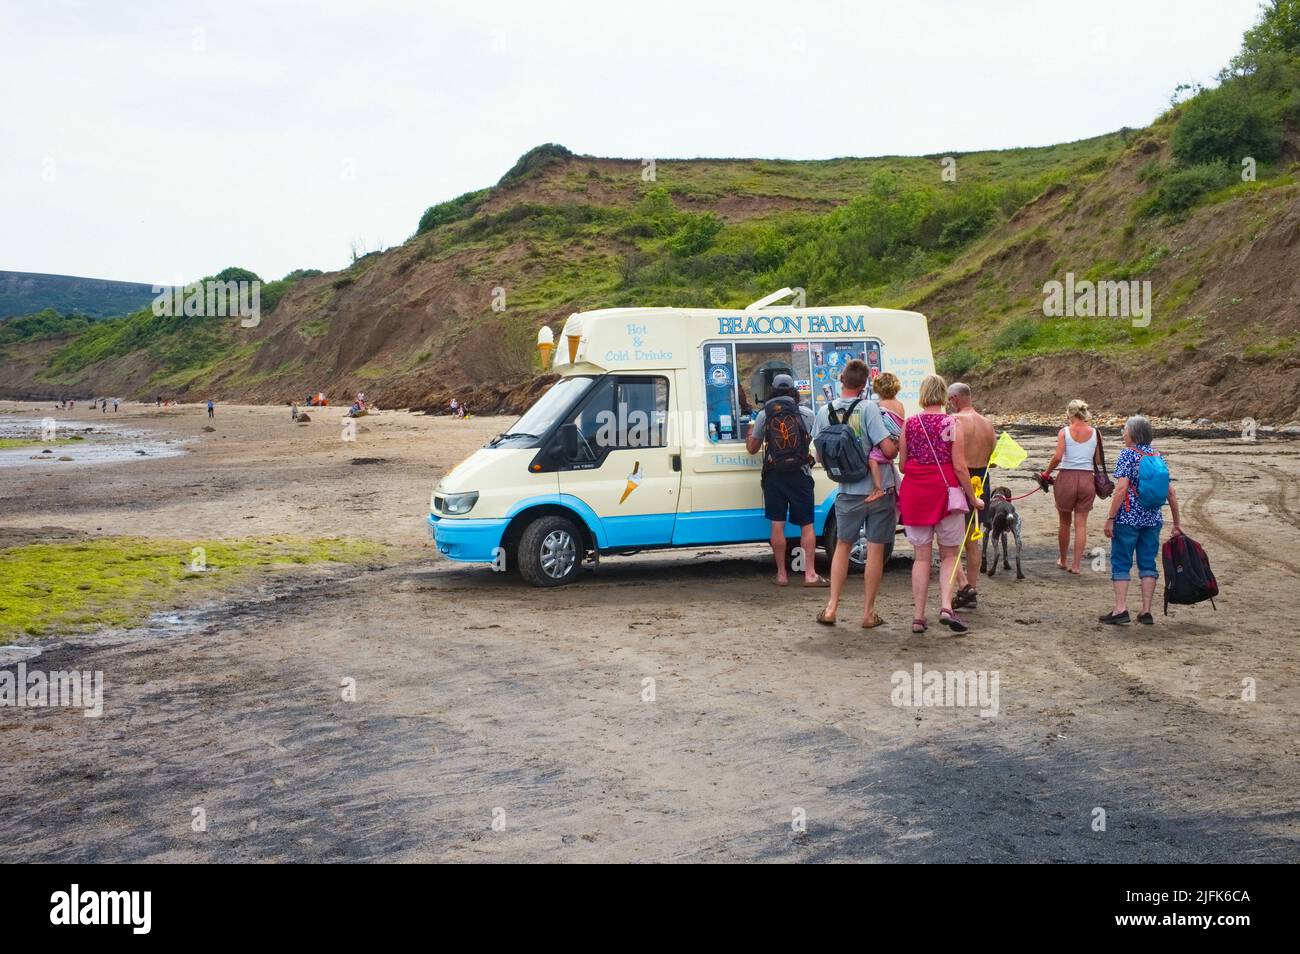 People queueing for ice creams from a van on the beach at Robin Hood's Bay, North Yorkshire Stock Photo